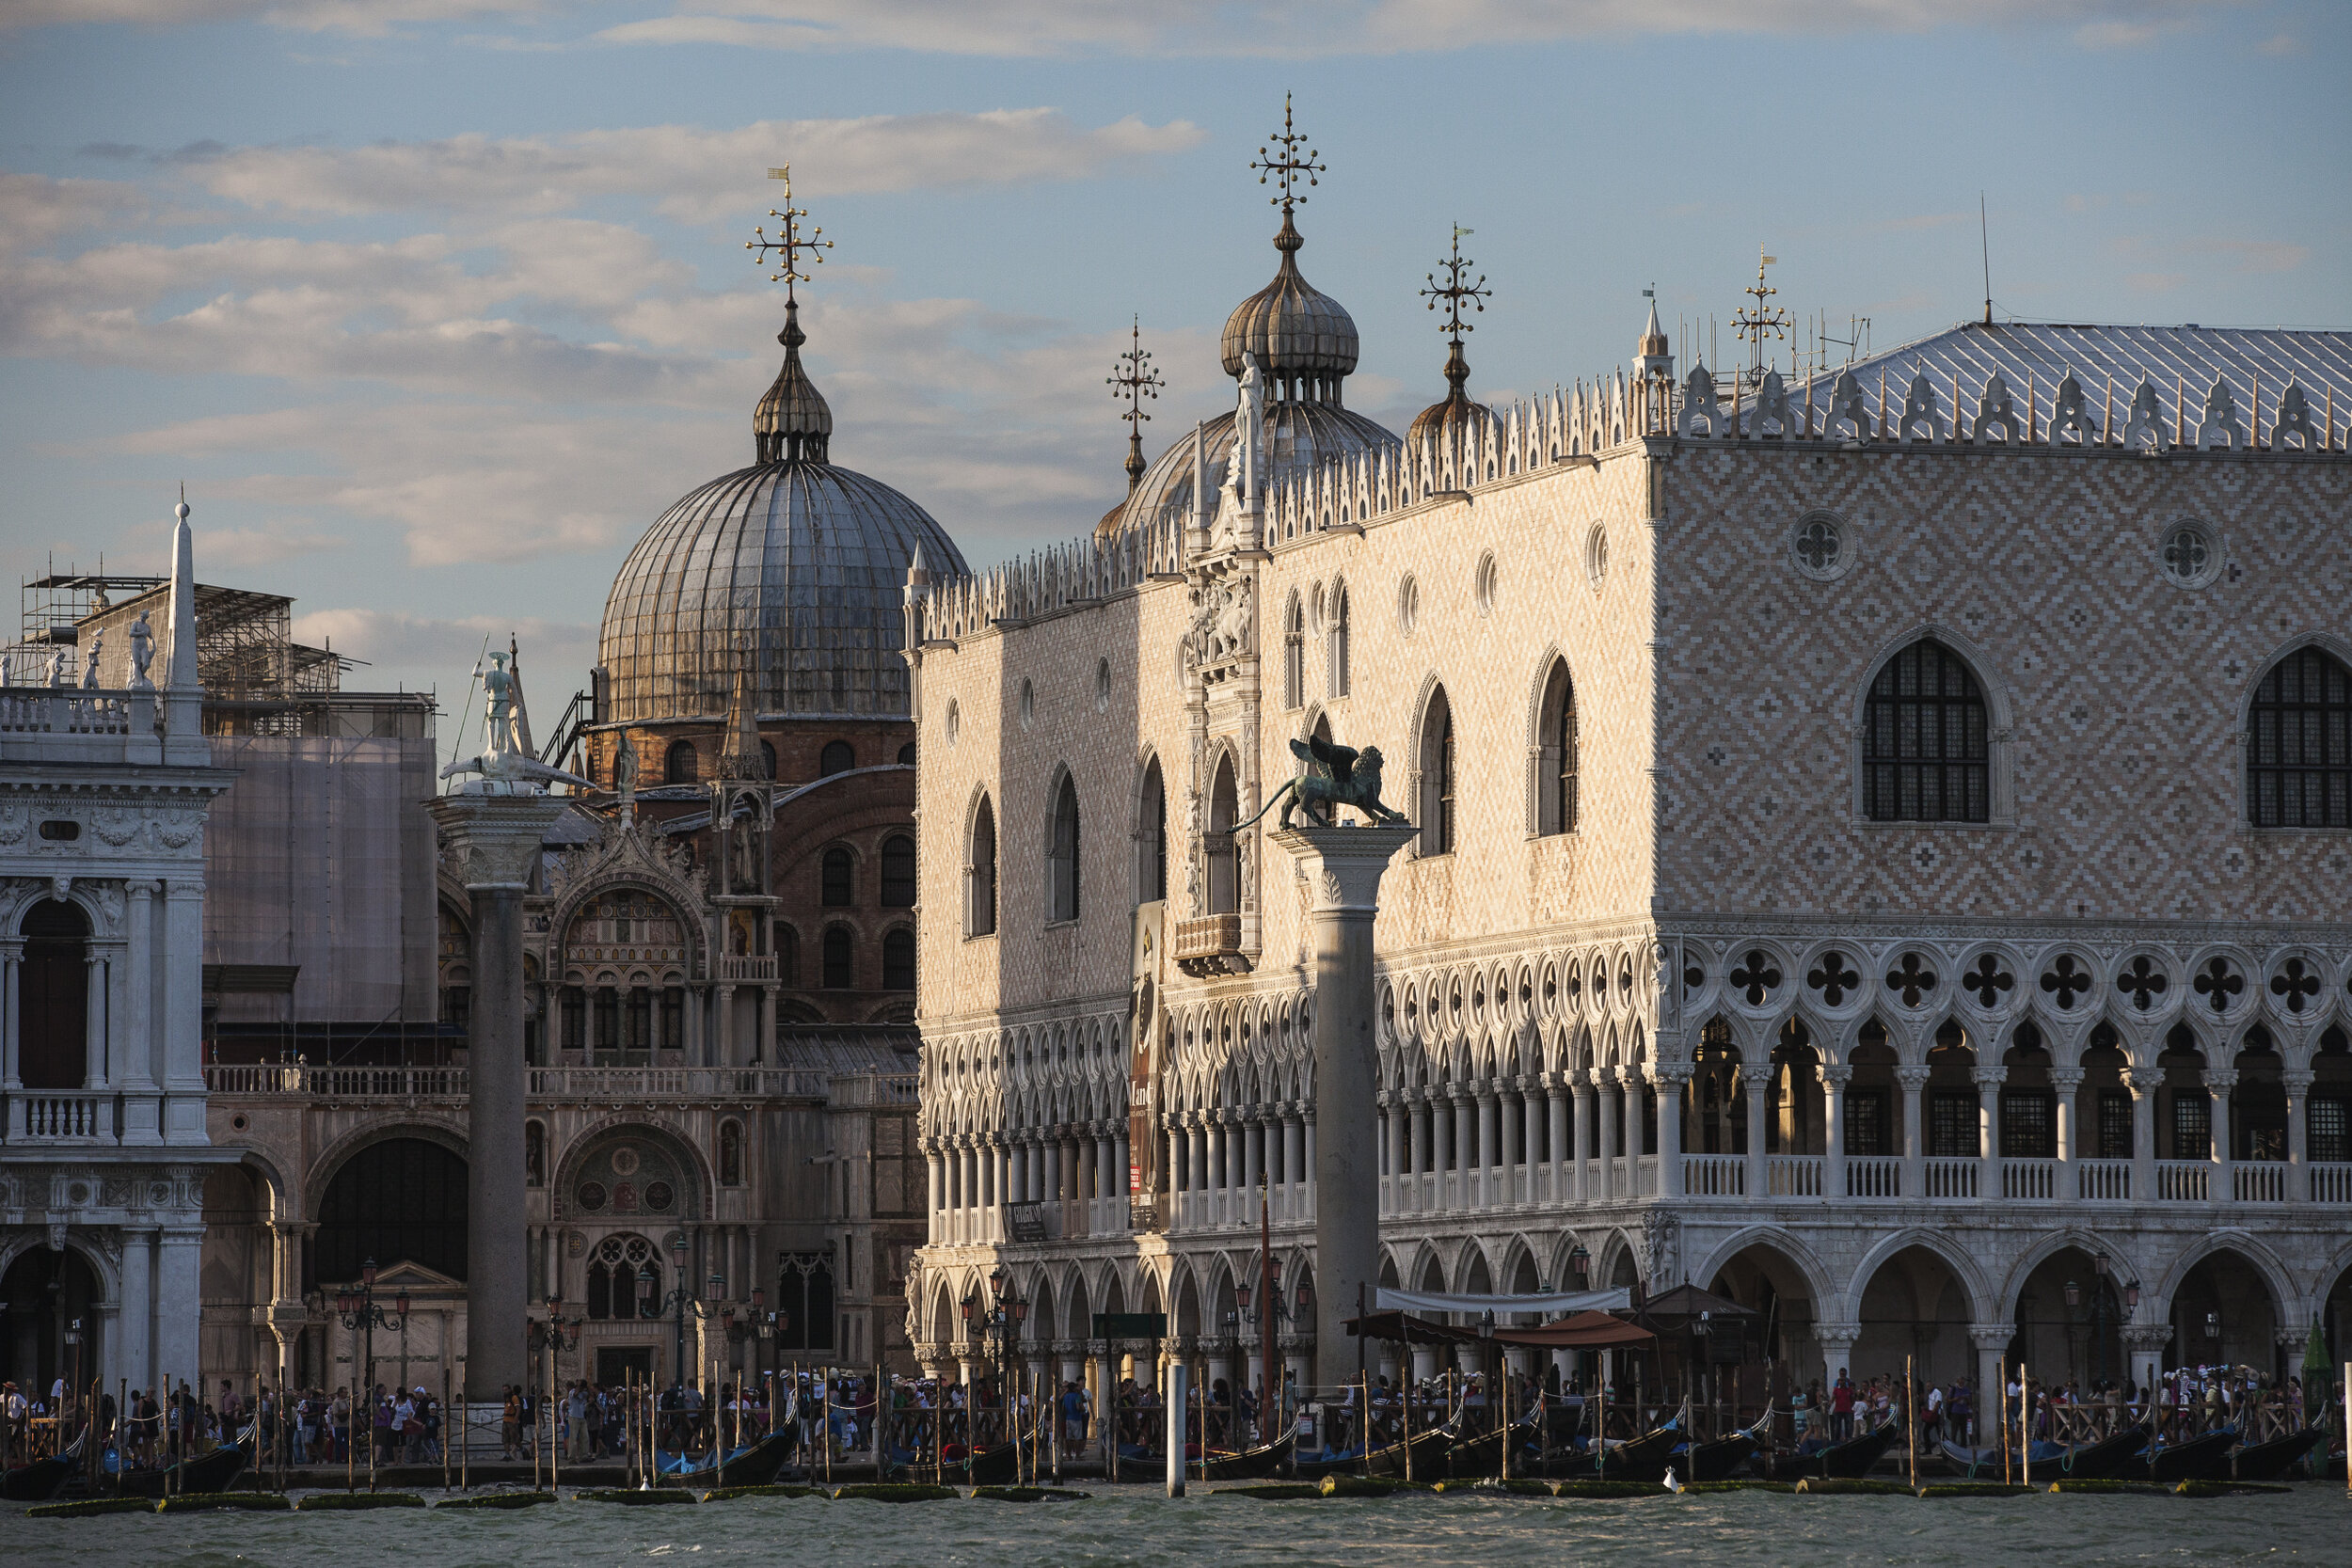 Aman Venice, Italy - Doges Palace, Basilica and Piazza San Marco_High Res_5308.jpg